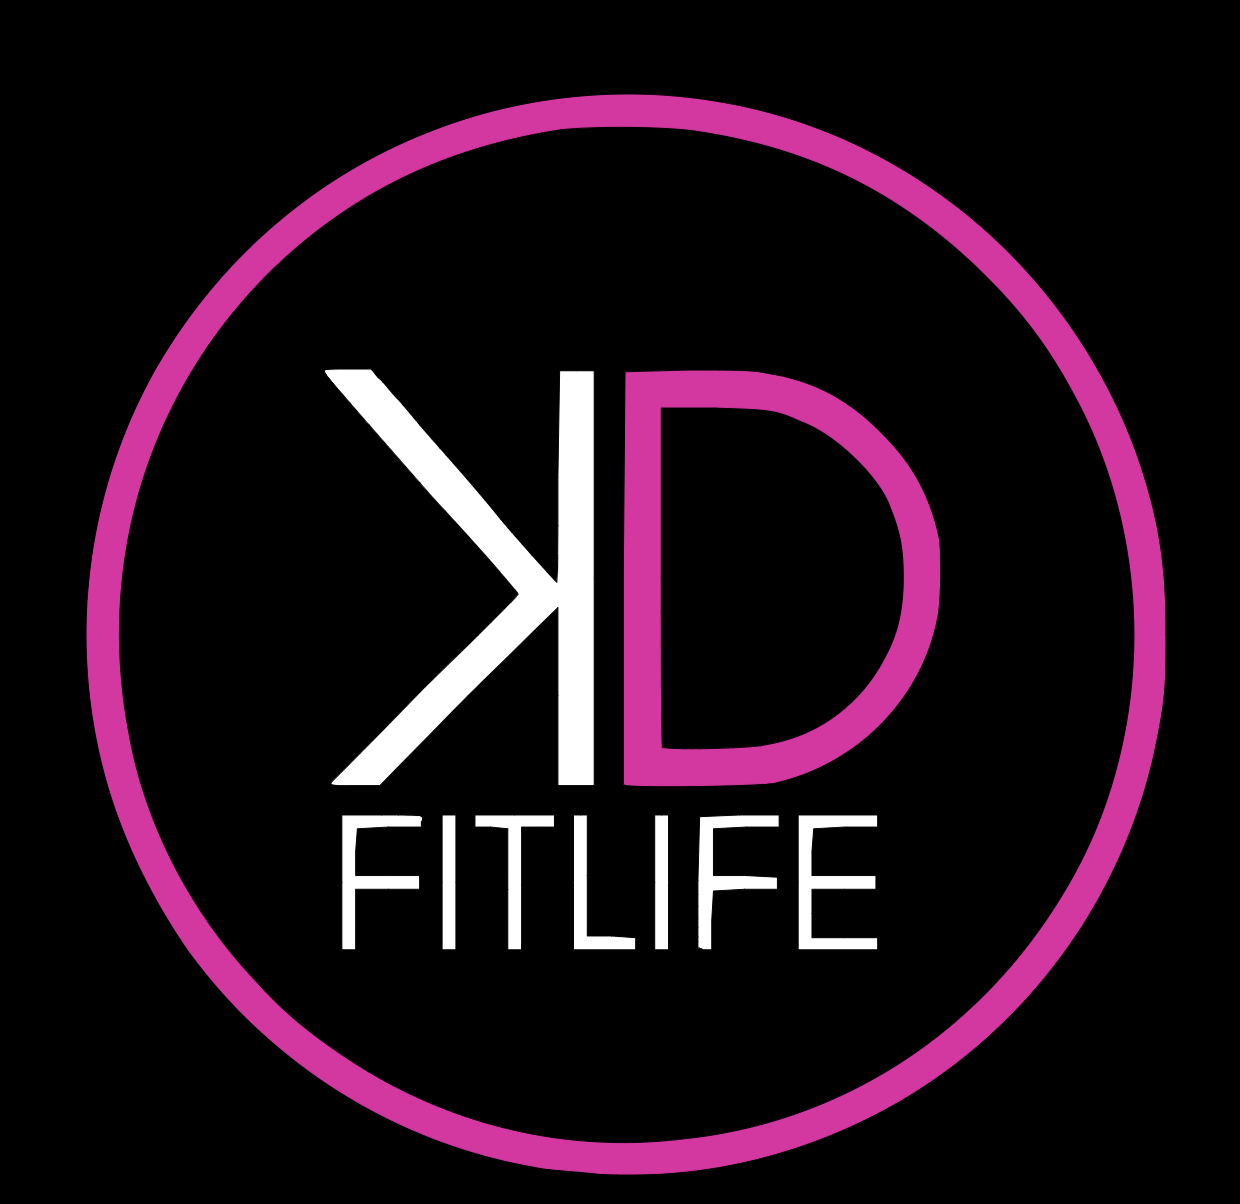 KD FITLIFE